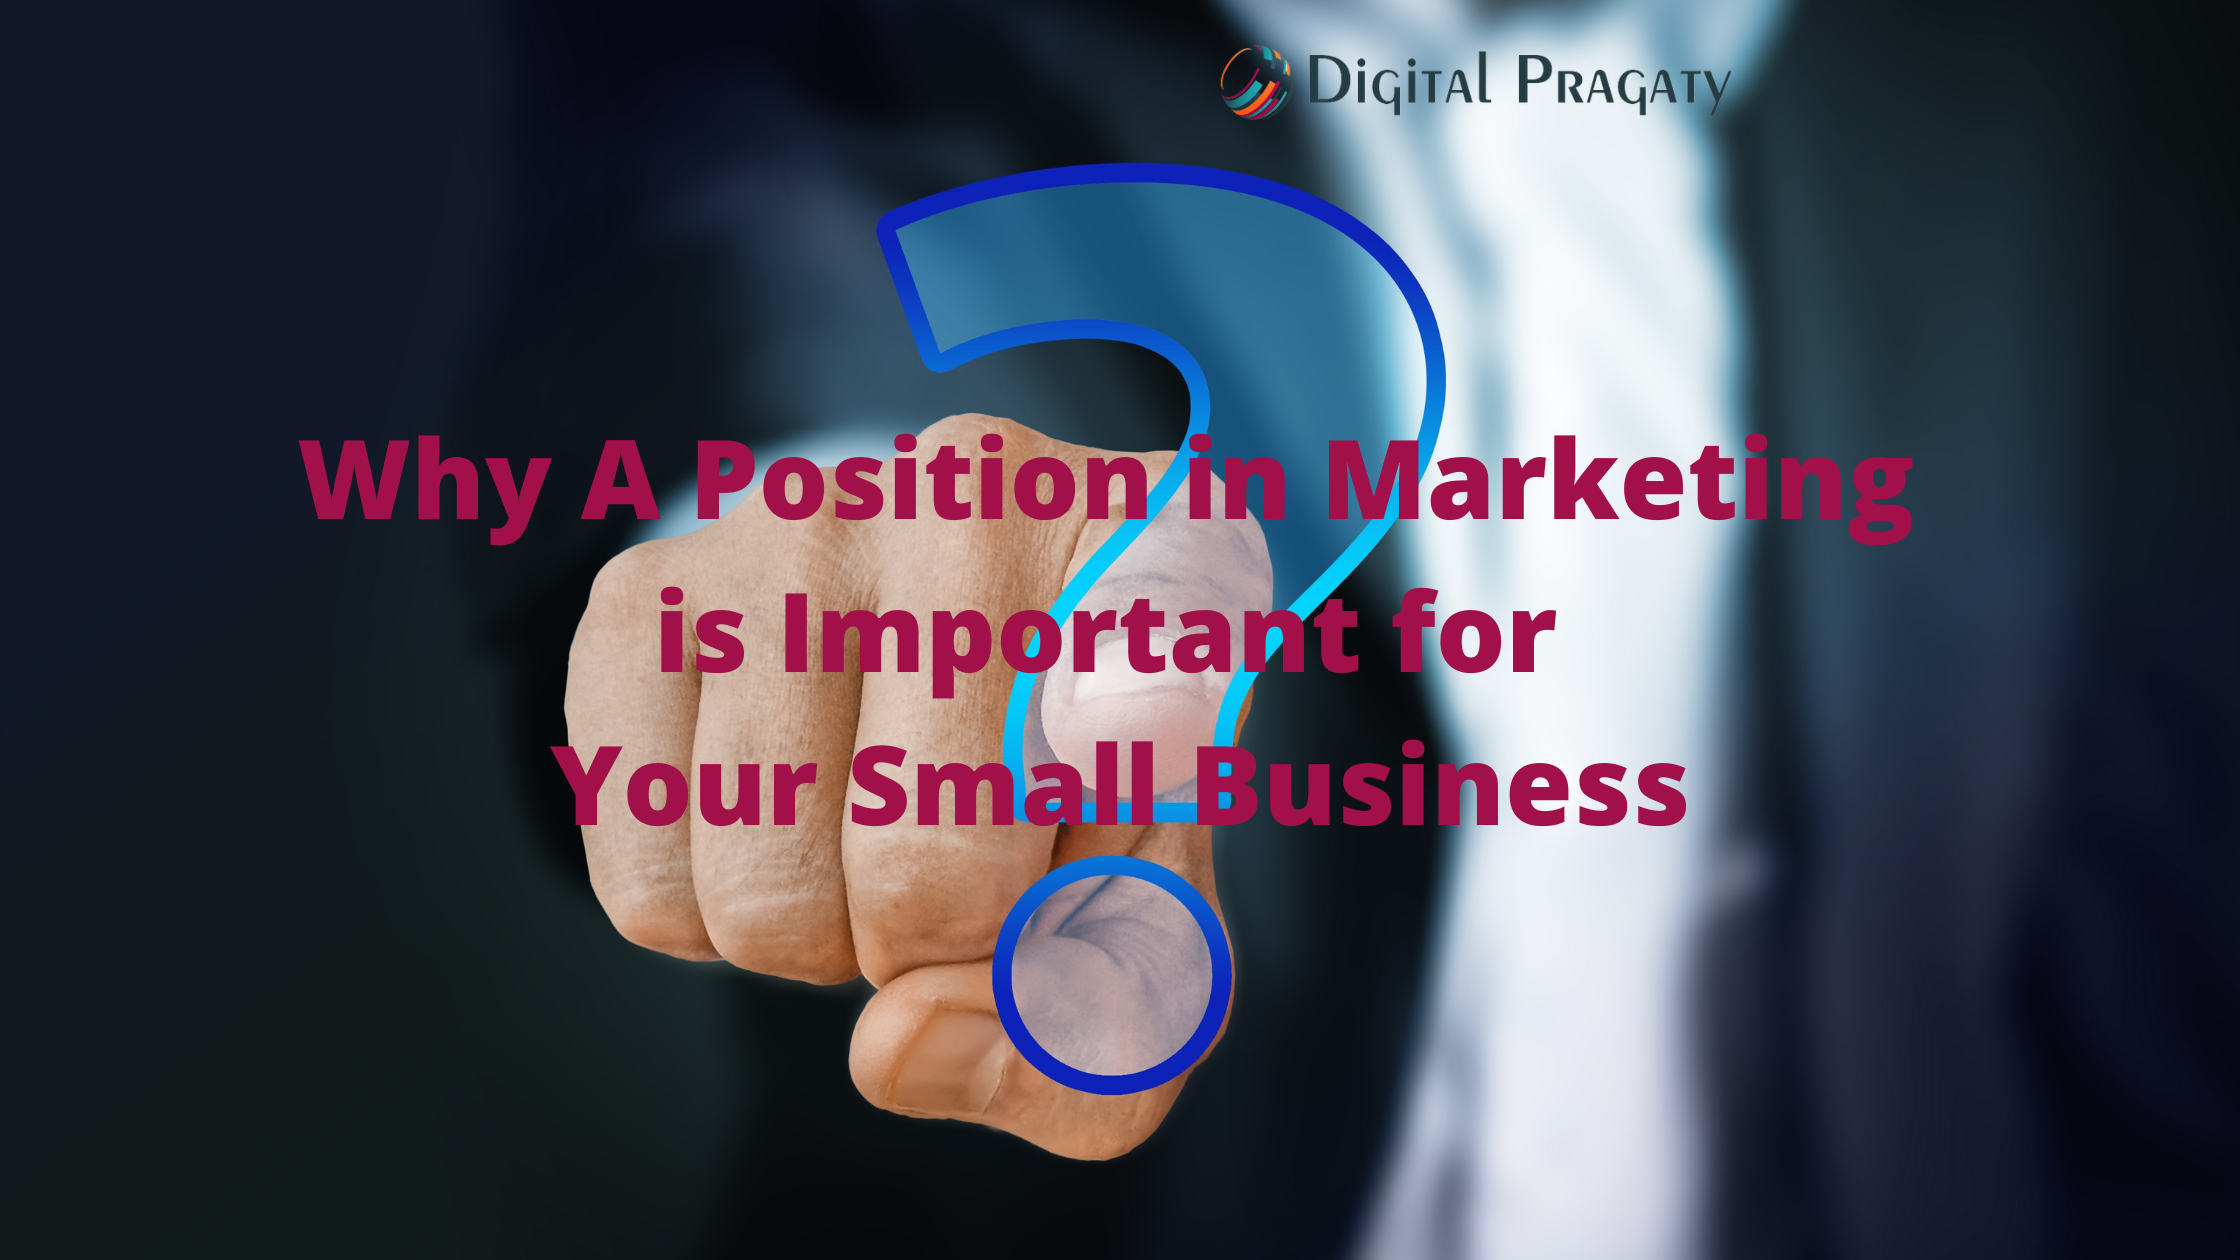 Why A Position in Marketing is Important for Your Small Business